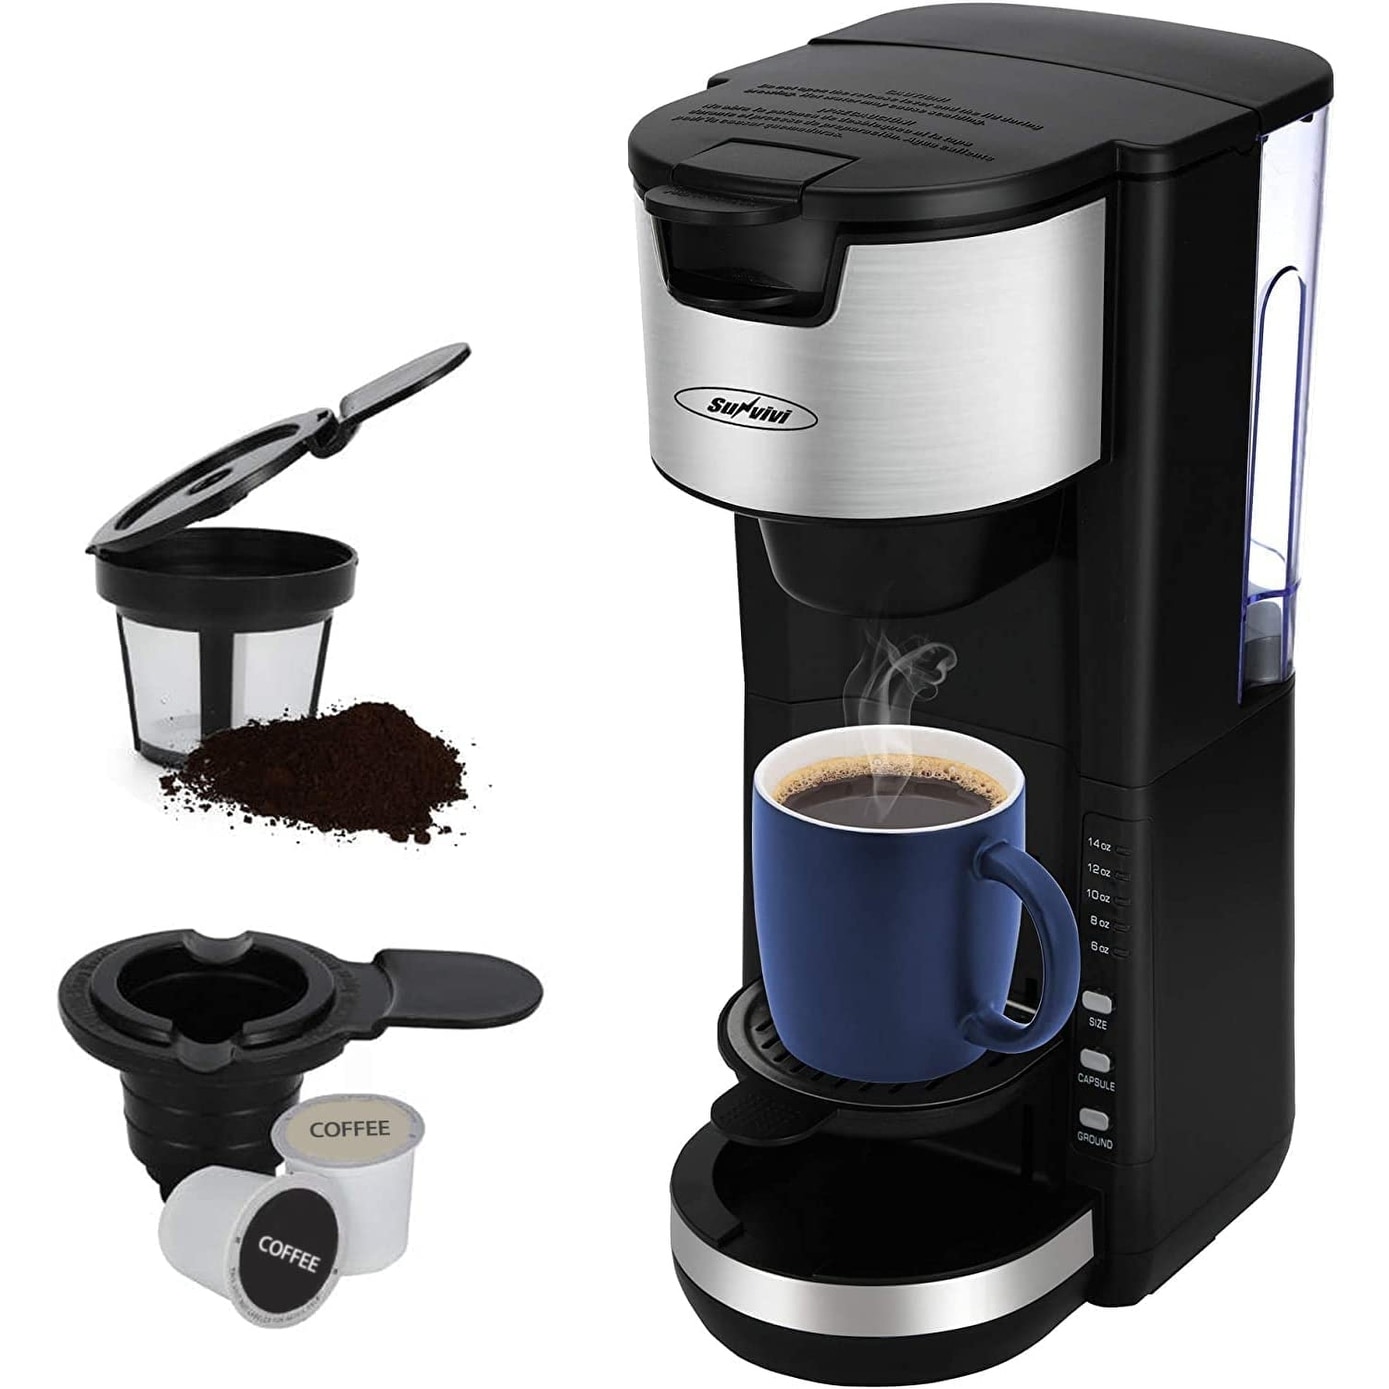 https://ak1.ostkcdn.com/images/products/is/images/direct/16090a16306245db861c30421697e863d31cb186/Royalcraft-Single-Serve-Coffee-Maker-For-Single-Cup-Pods-and-Ground-Coffee%2CBlack.jpg